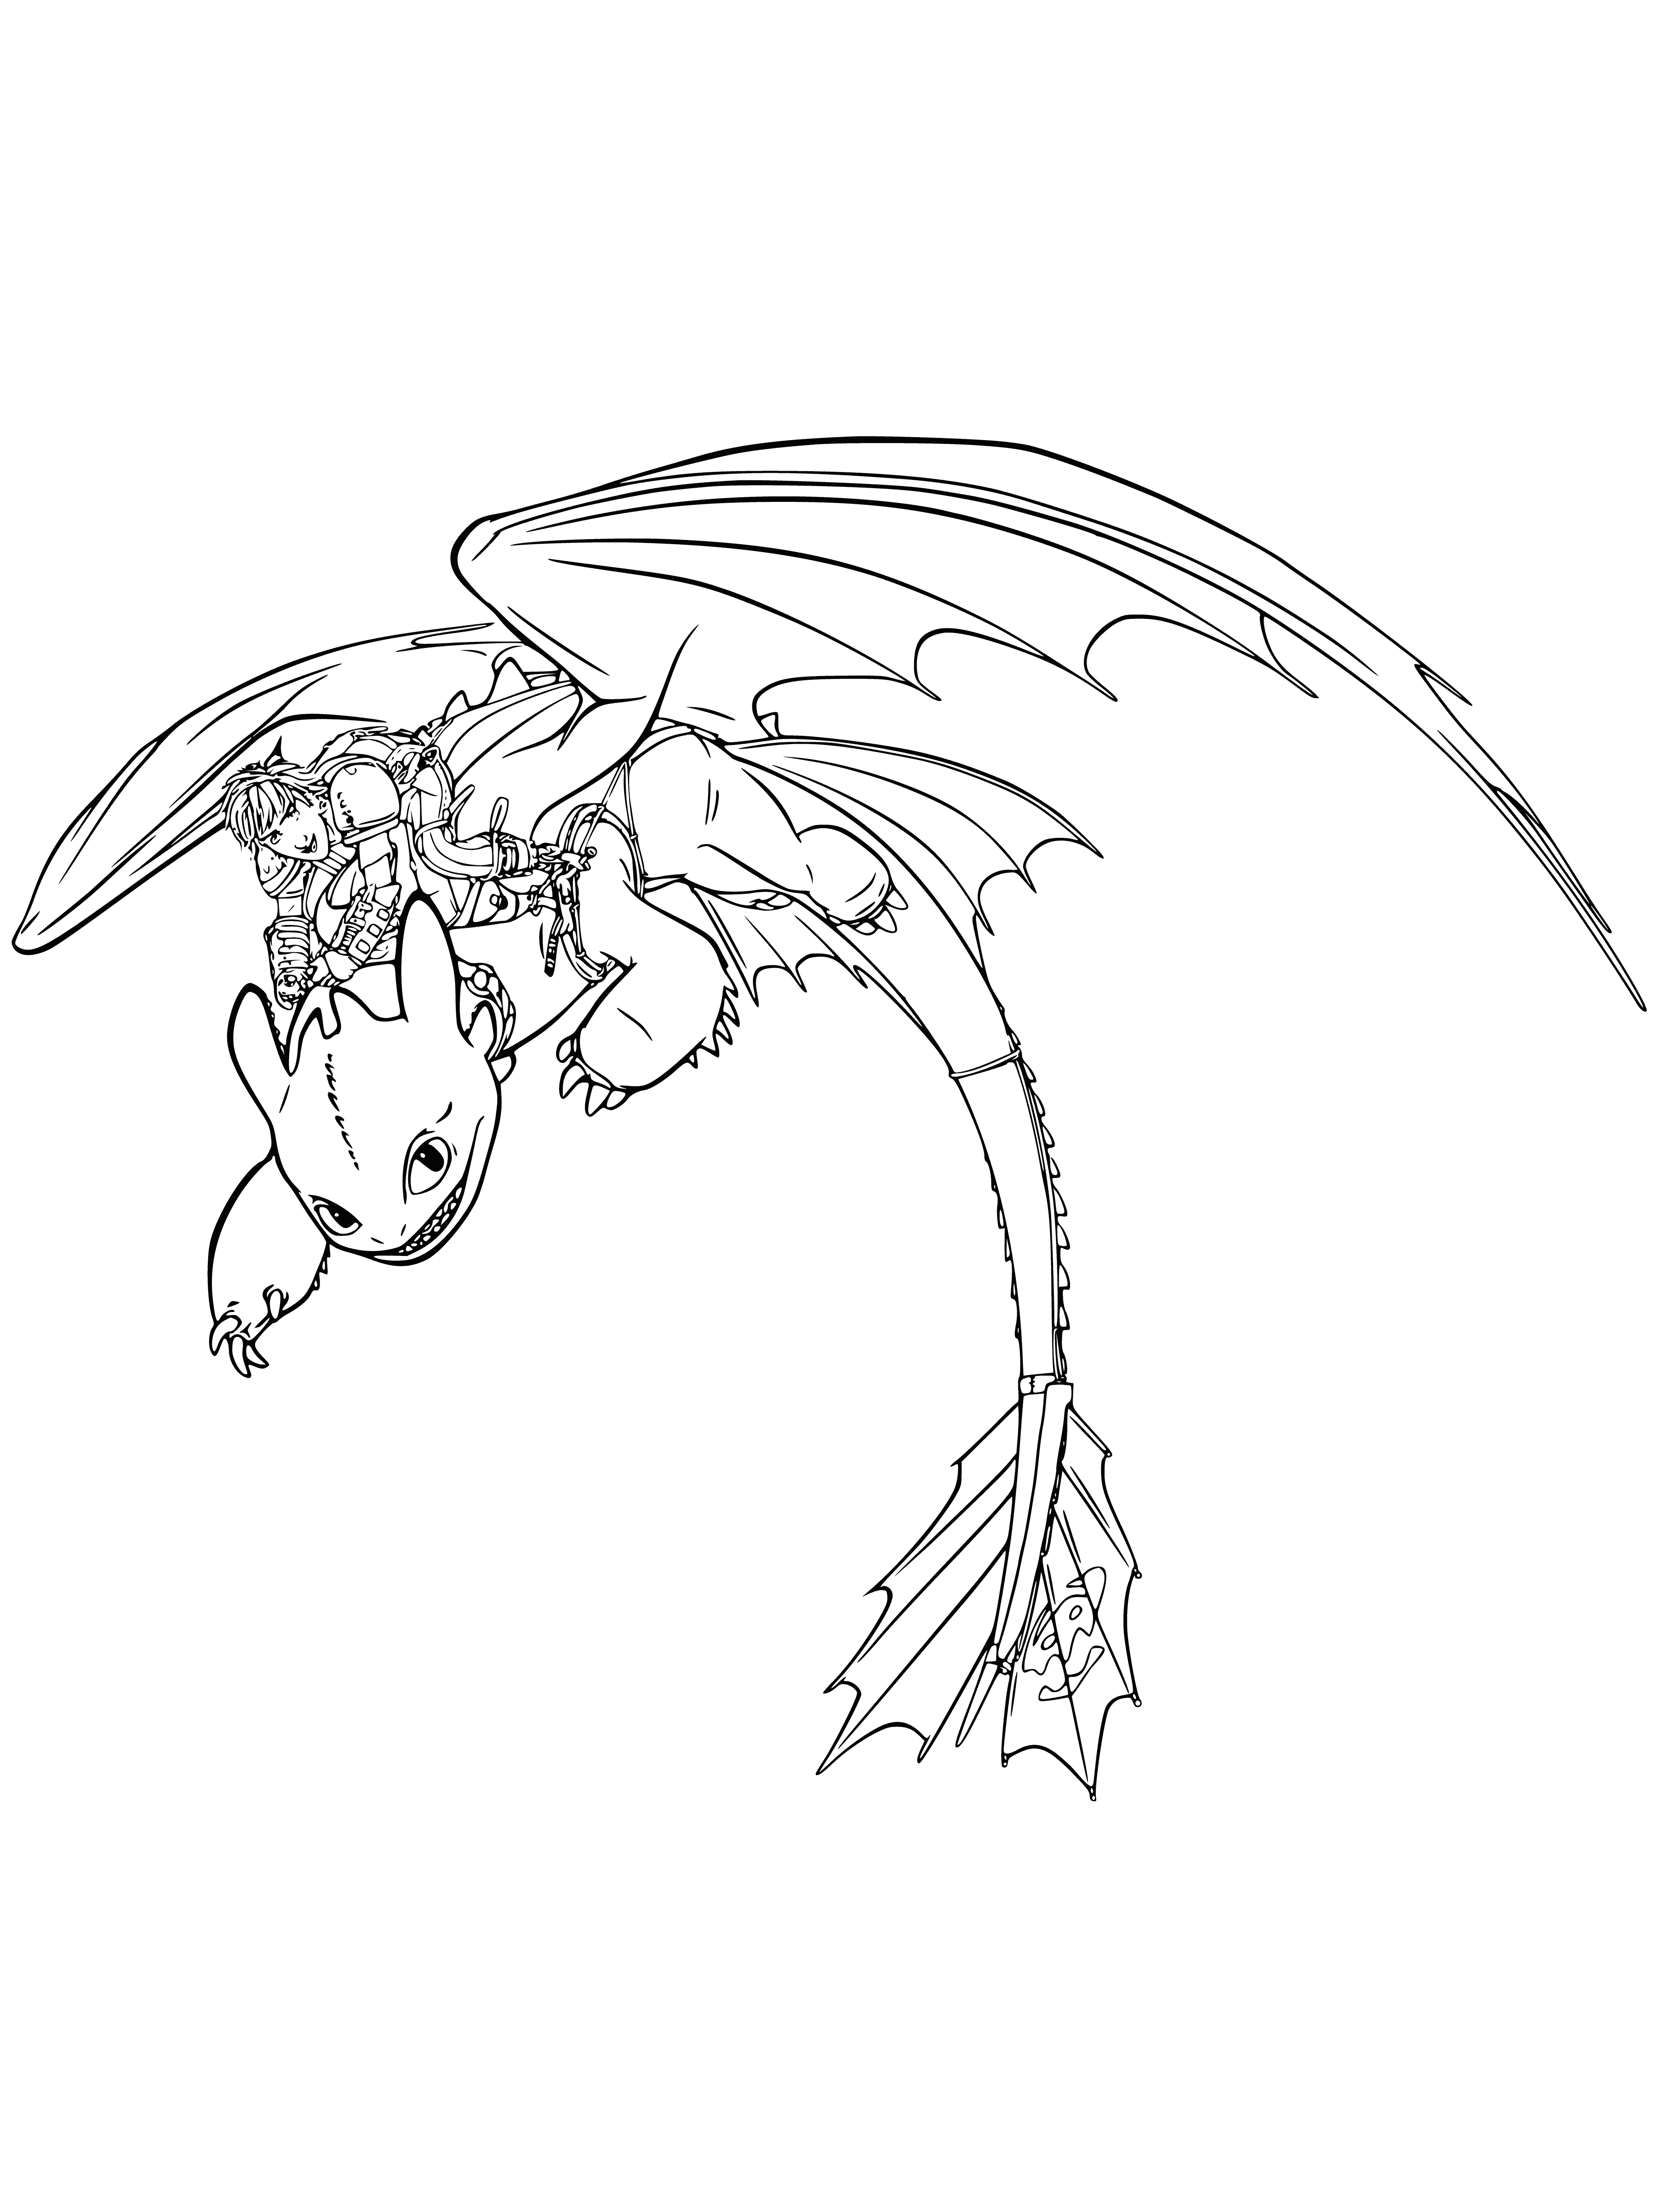 coloring page: Two dragons rest, the blue with stripes & the purple with spots. The blue dragon lazily watches the sleeping one, snoring contentedly.